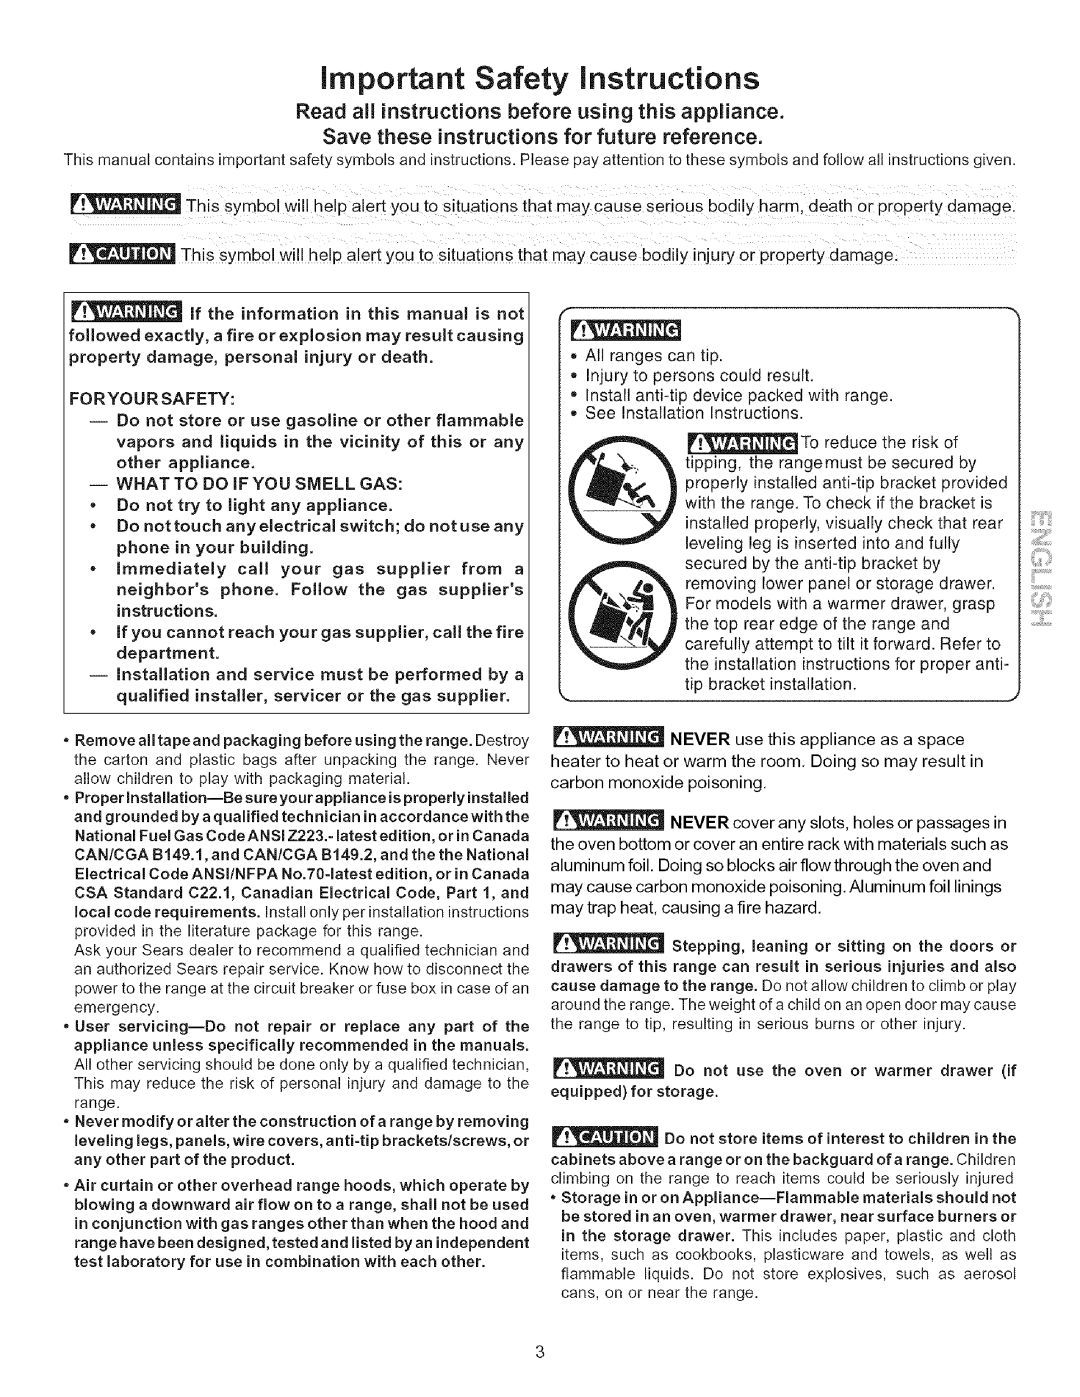 Kenmore 790.7156 manual important Safety instructions, Read all instructions before using this appliance 